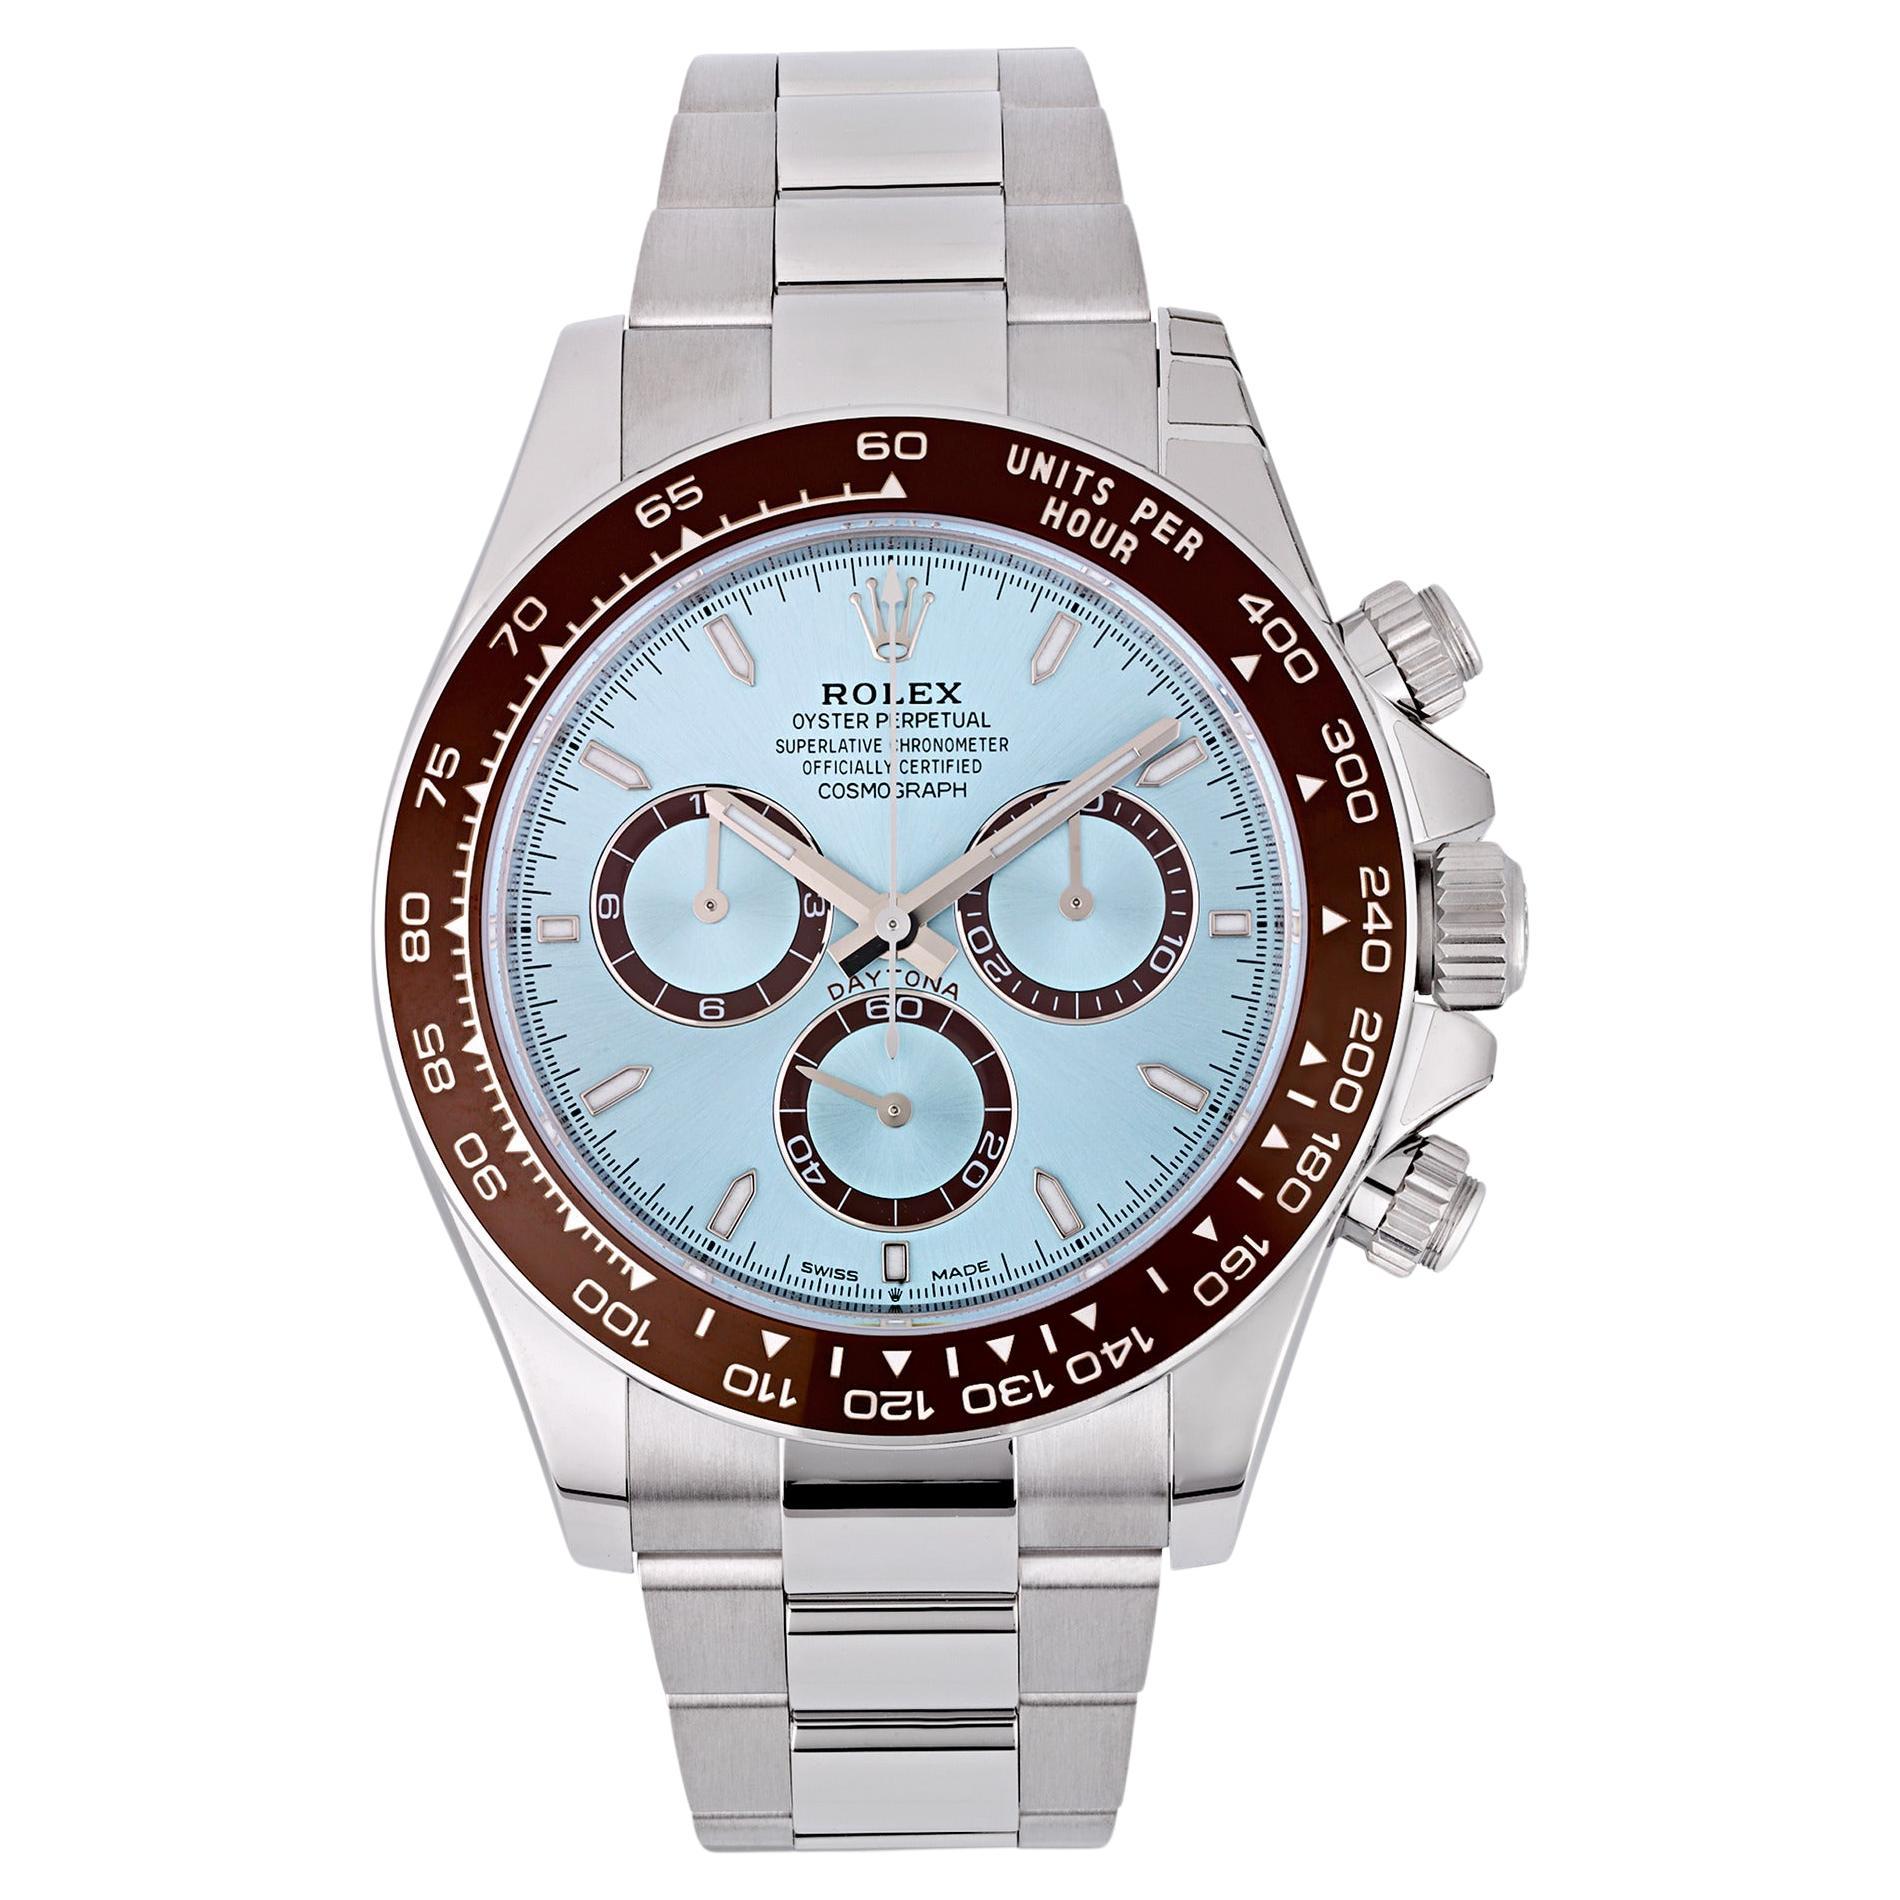 What color dial does a Rolex Daytona Panda have?